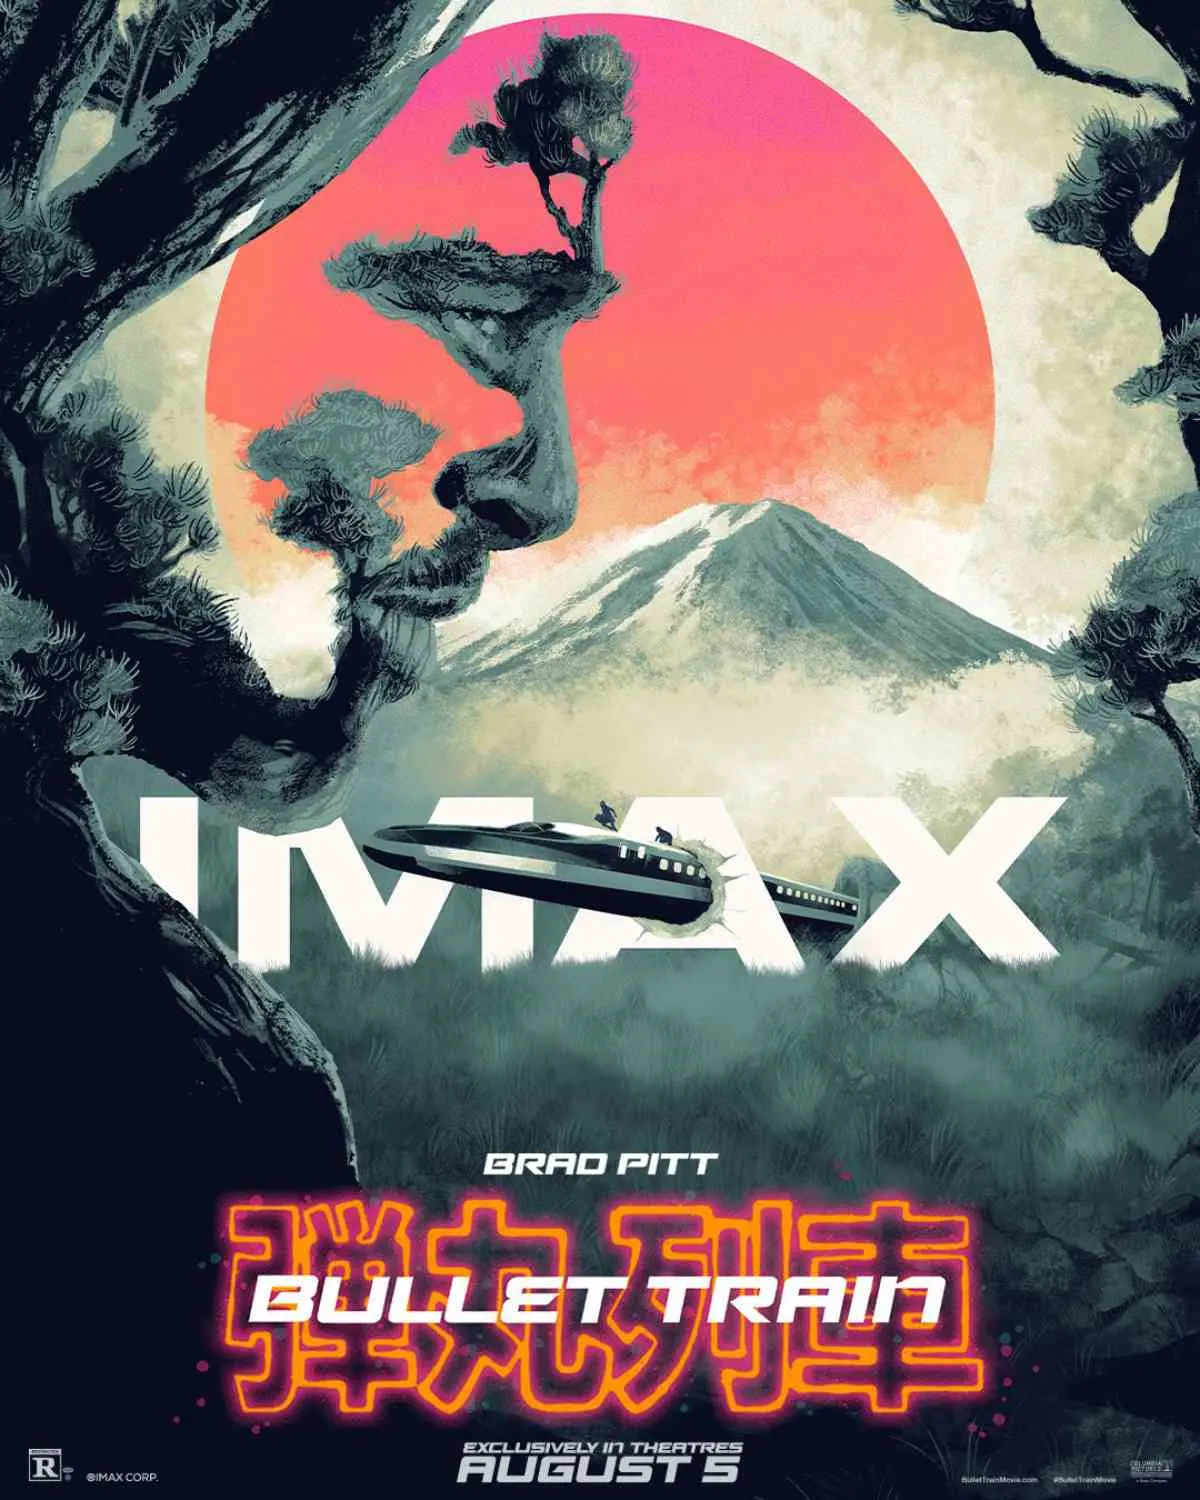 Bullet Train IMAX Trailer and More Posters Debut